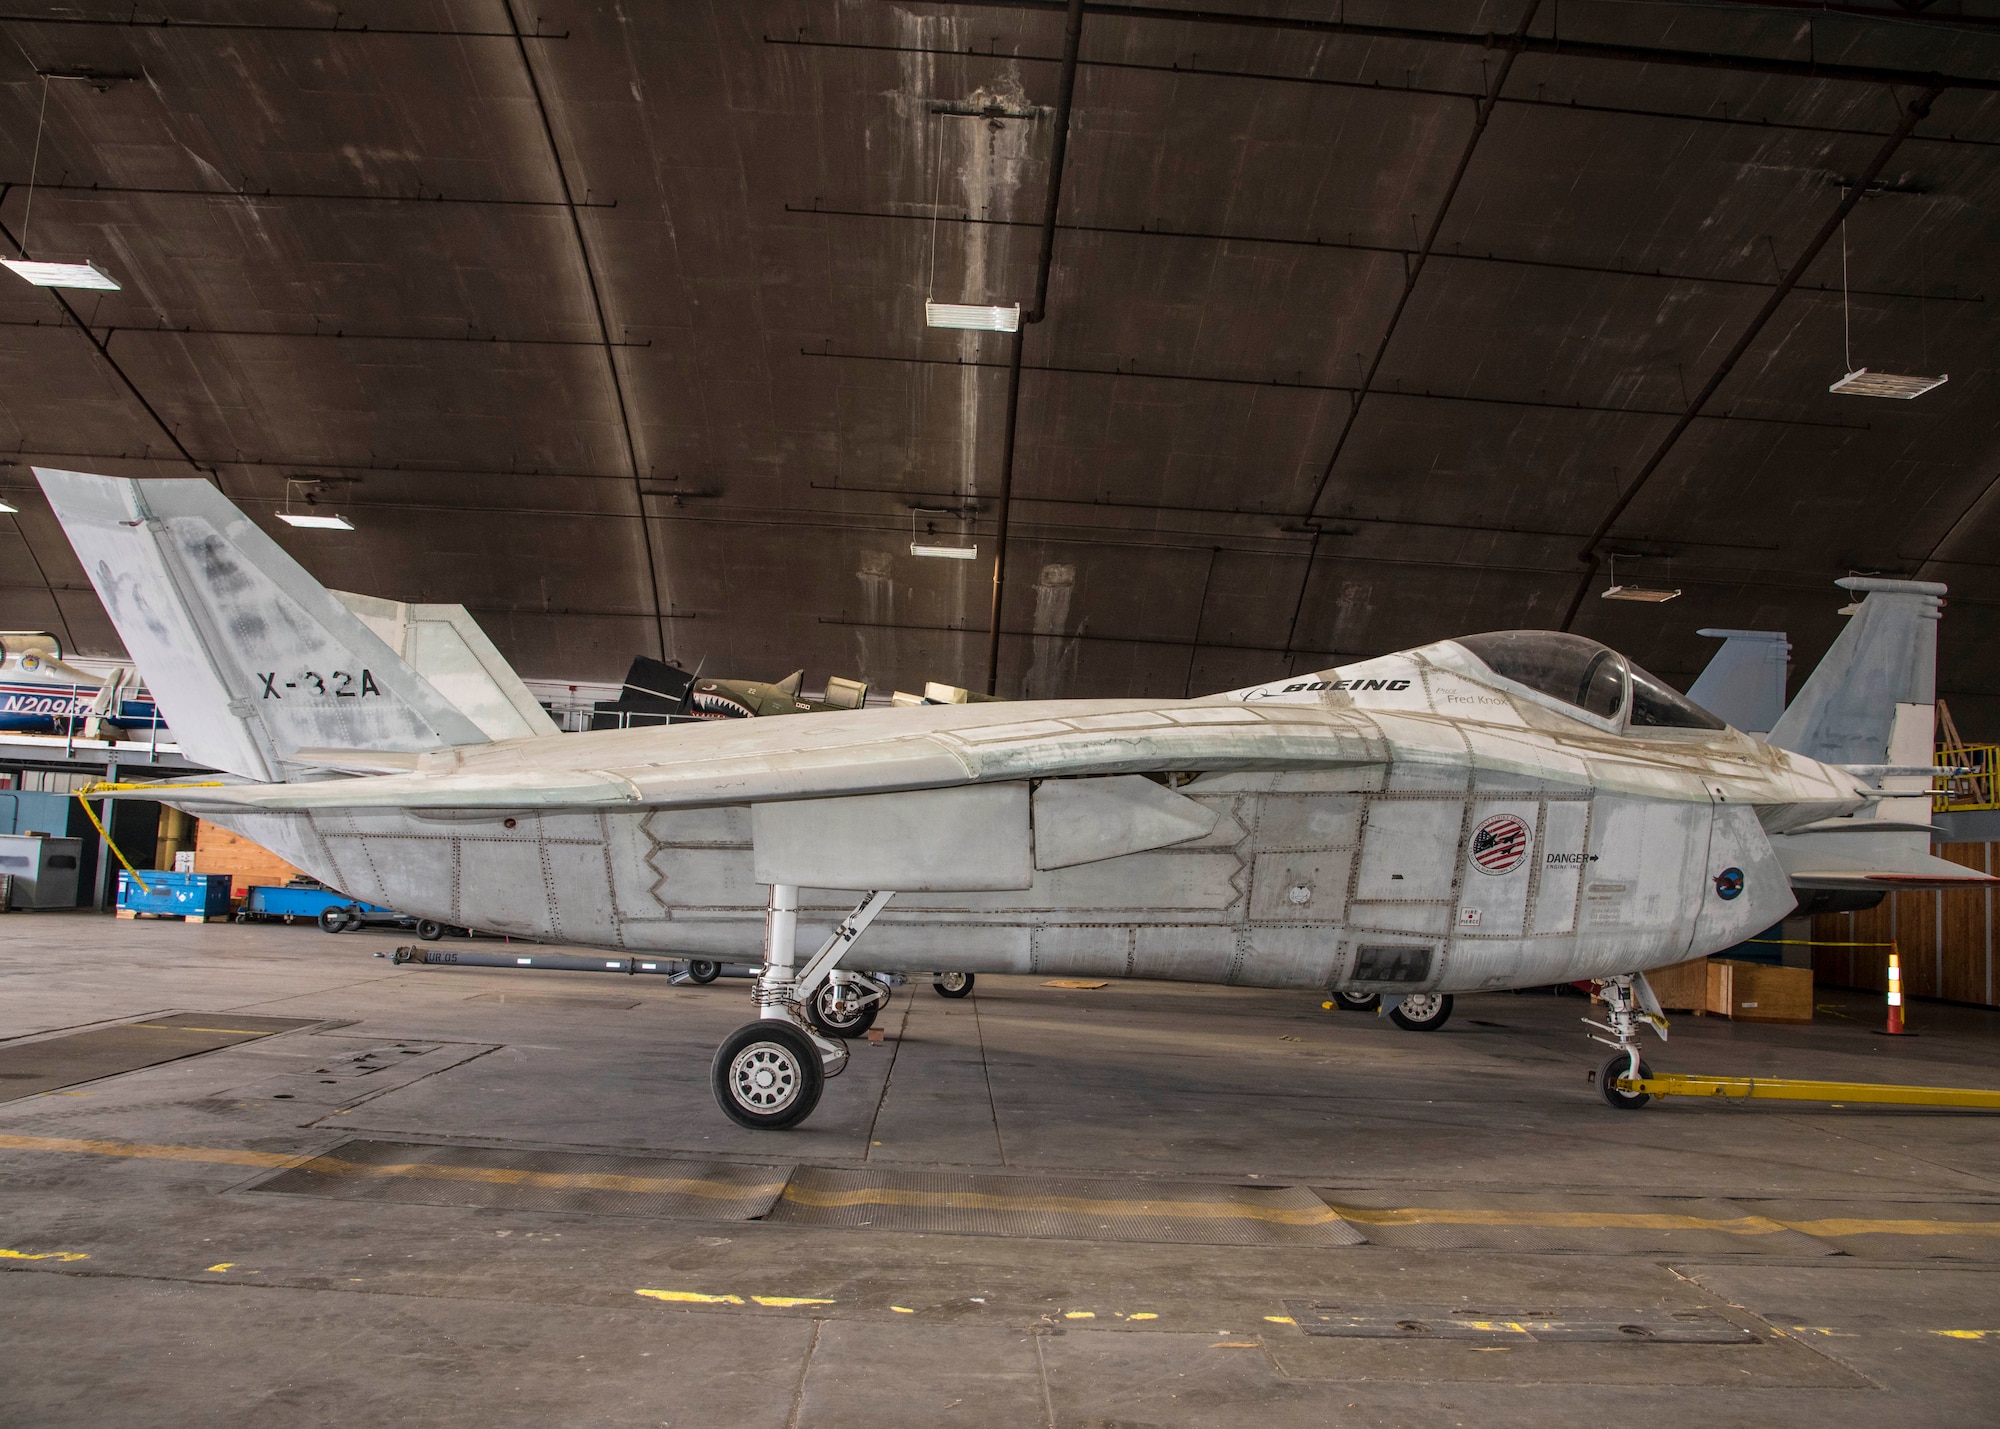 DAYTON, Ohio -- The Boeing X-32A on display in a restoration building at the National Museum of the U.S. Air Force on Nov. 20, 2016. (U.S. Air Force photo by Ken LaRock)